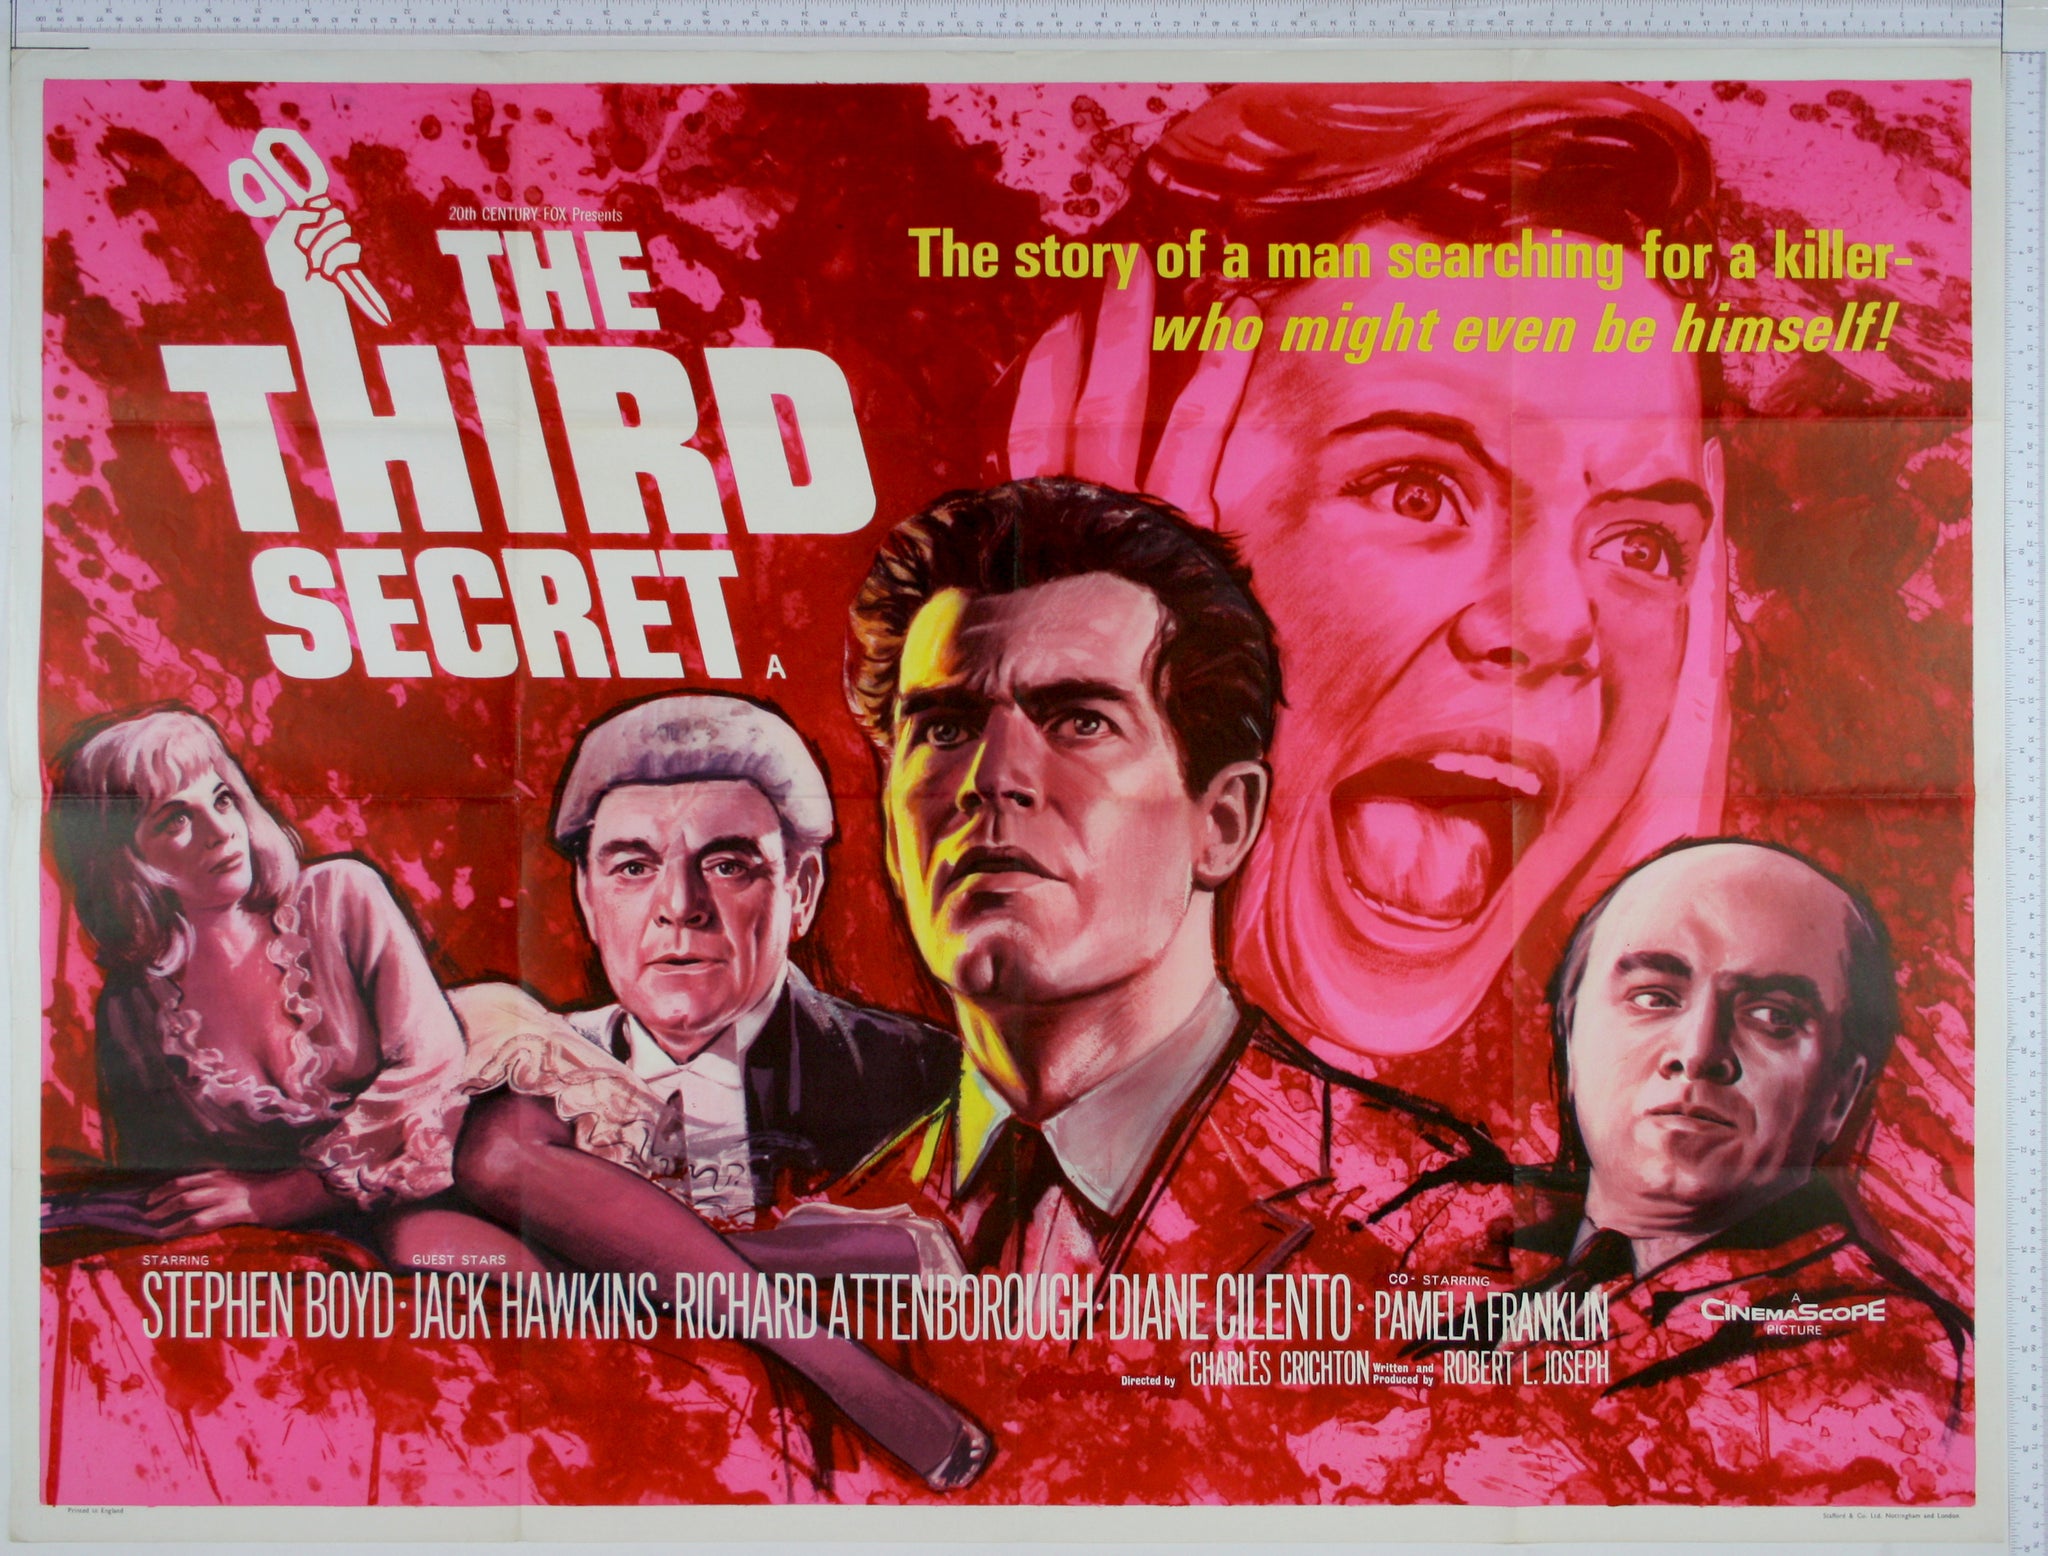 On mottled red, artwork of screaming girl, with portraits of each main character, Boyd at centre. H of title has dagger motif.